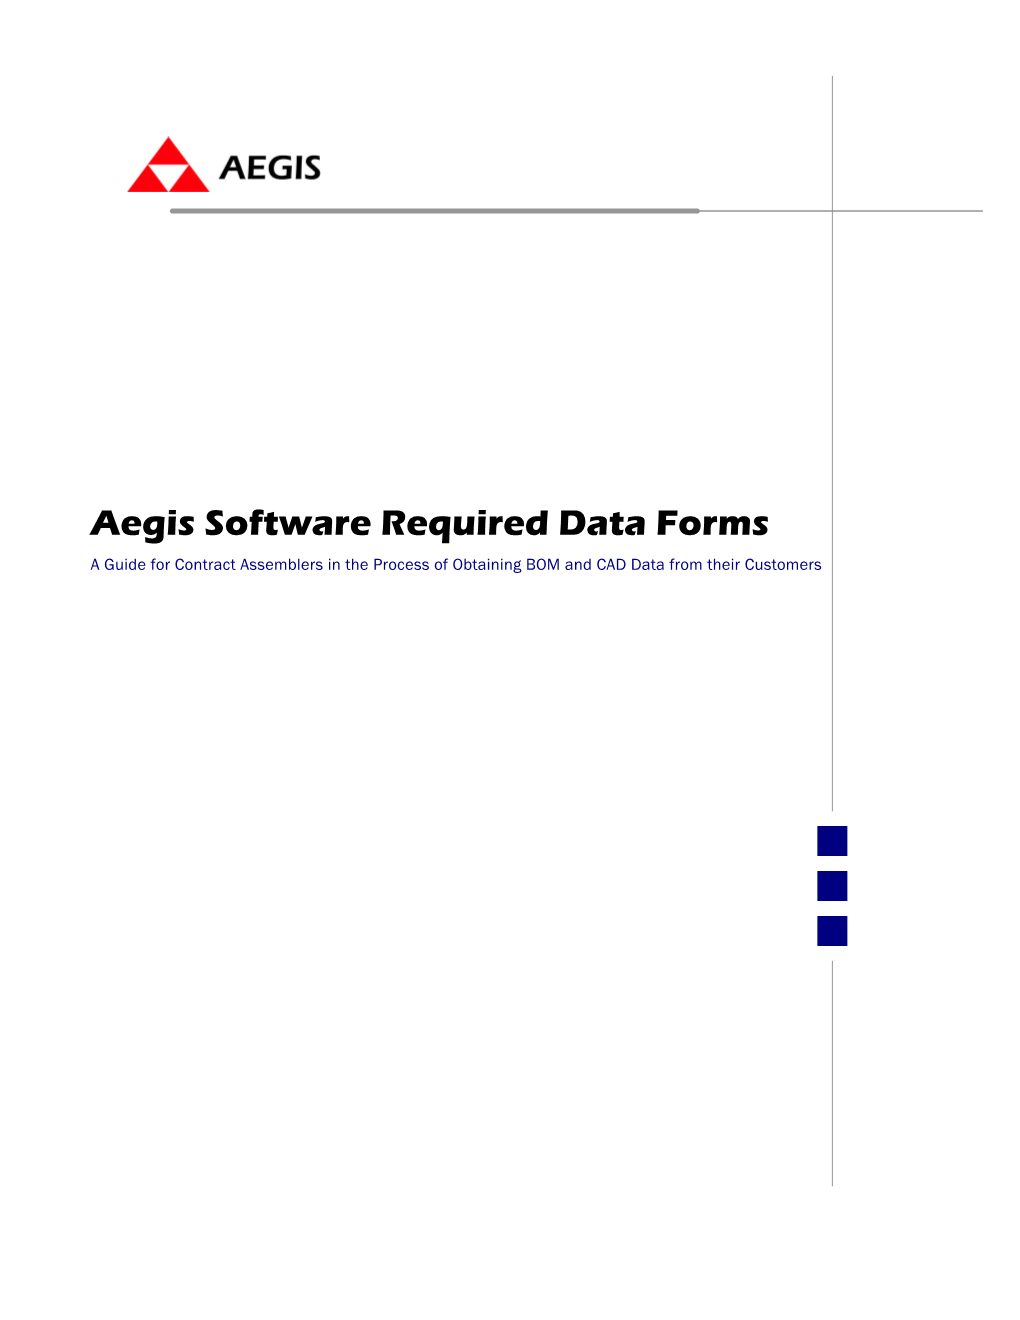 Aegis Software Required Data Forms a Guide for Contract Assemblers in the Process of Obtaining BOM and CAD Data from Their Customers